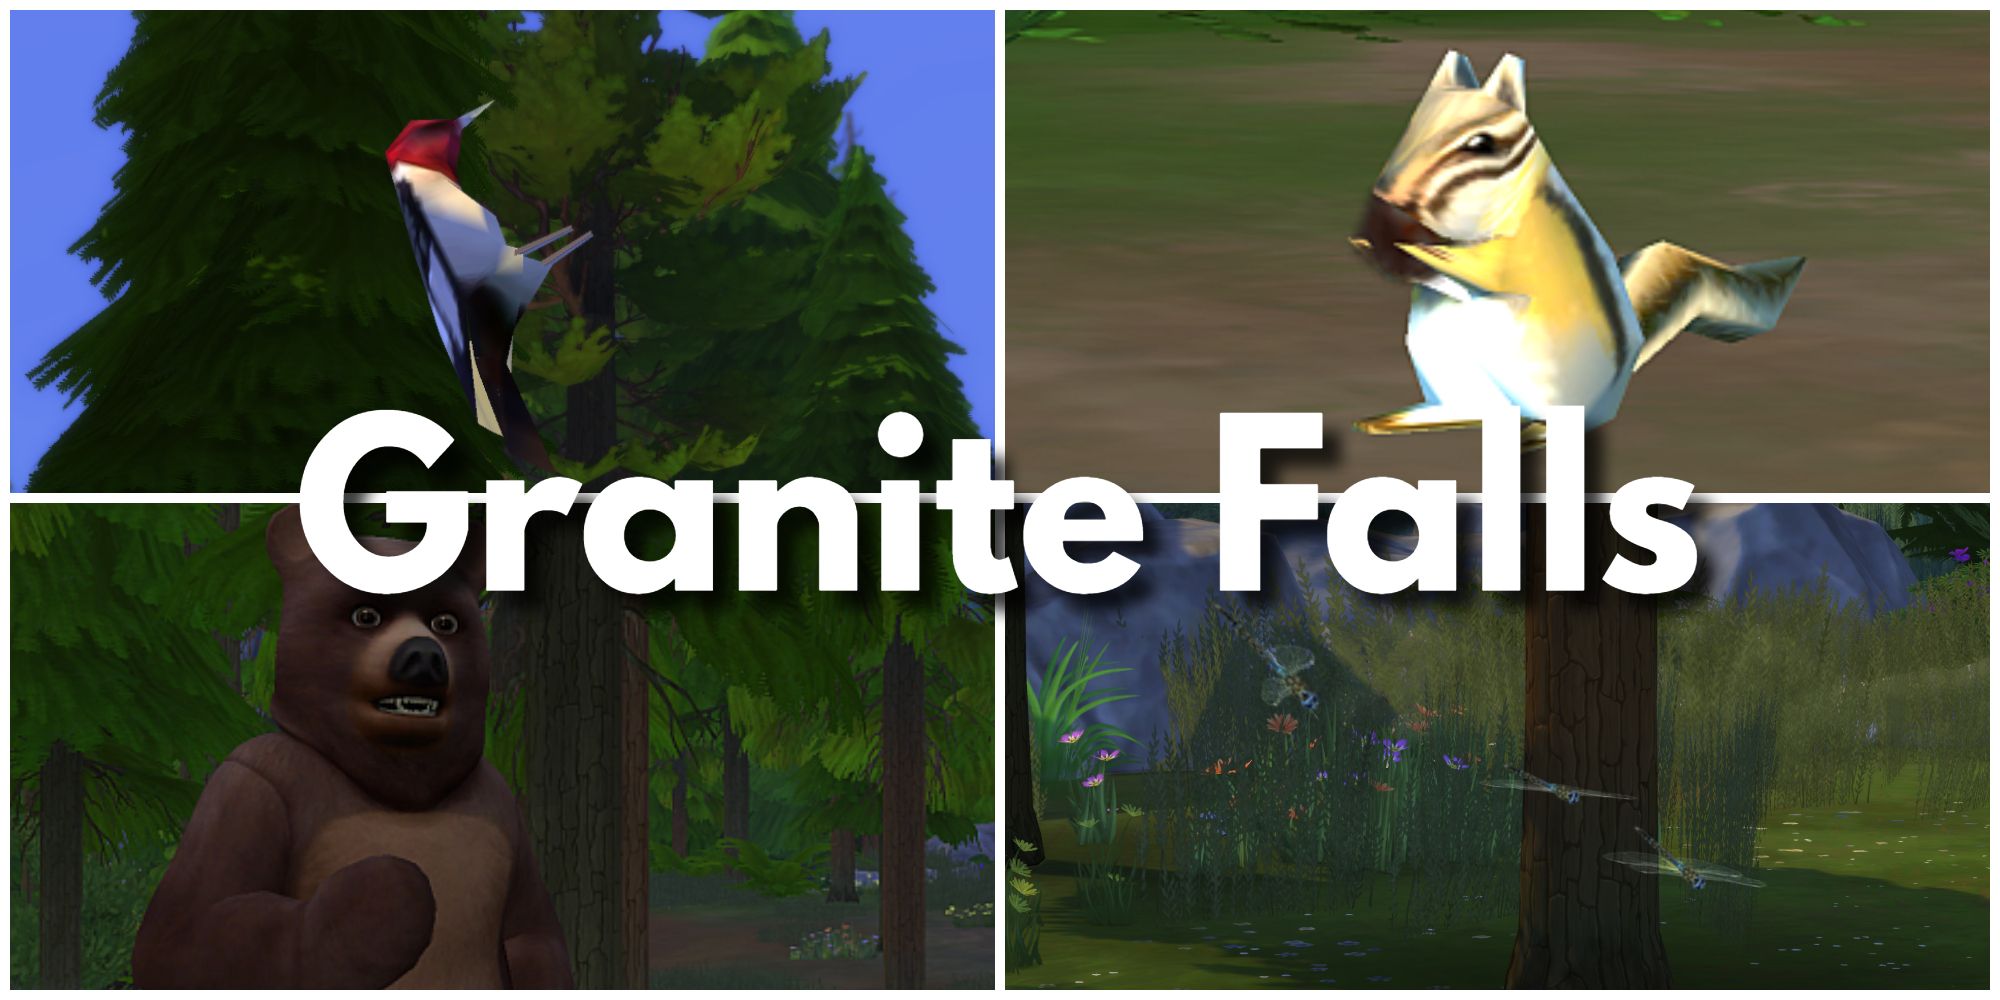 Granite Falls has a lot more animals than one might think. Here is a woodpecker, a chipmunk, insects, and a bear.